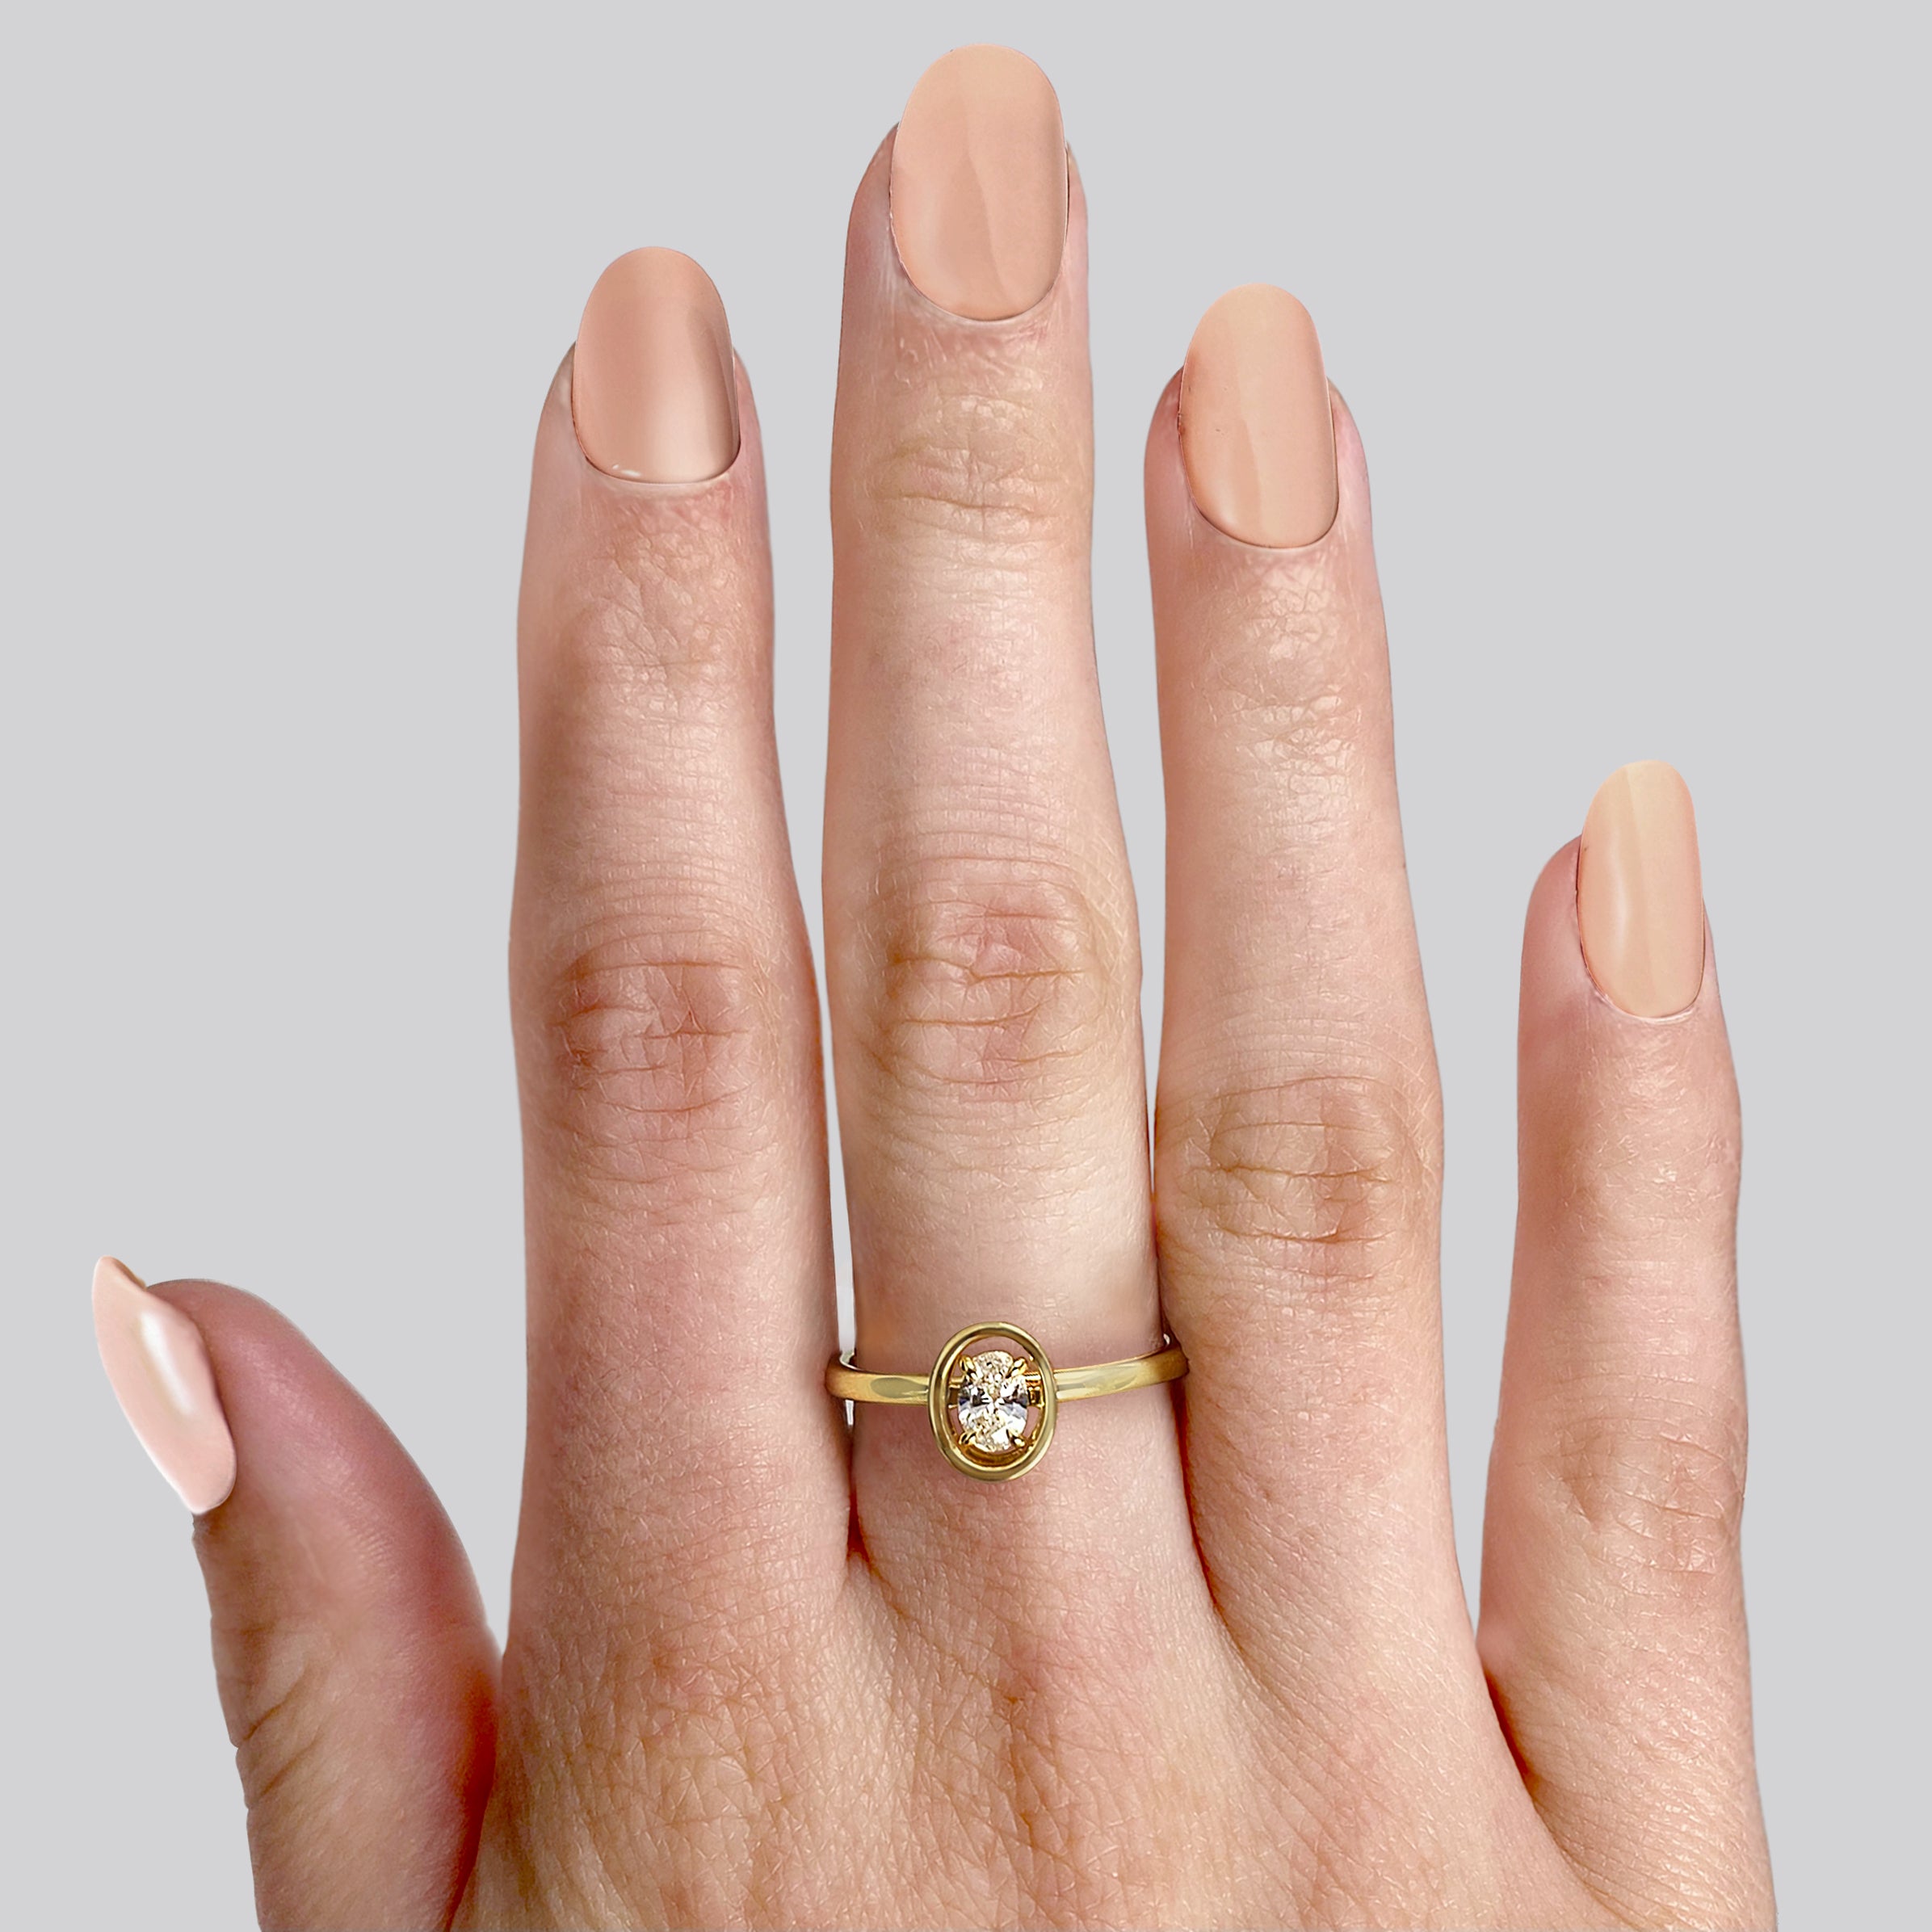 Shimansky - Women Wearing the Saturn Oval Diamond Solitaire Ring 0.20ct crafted in 14K Yellow Gold